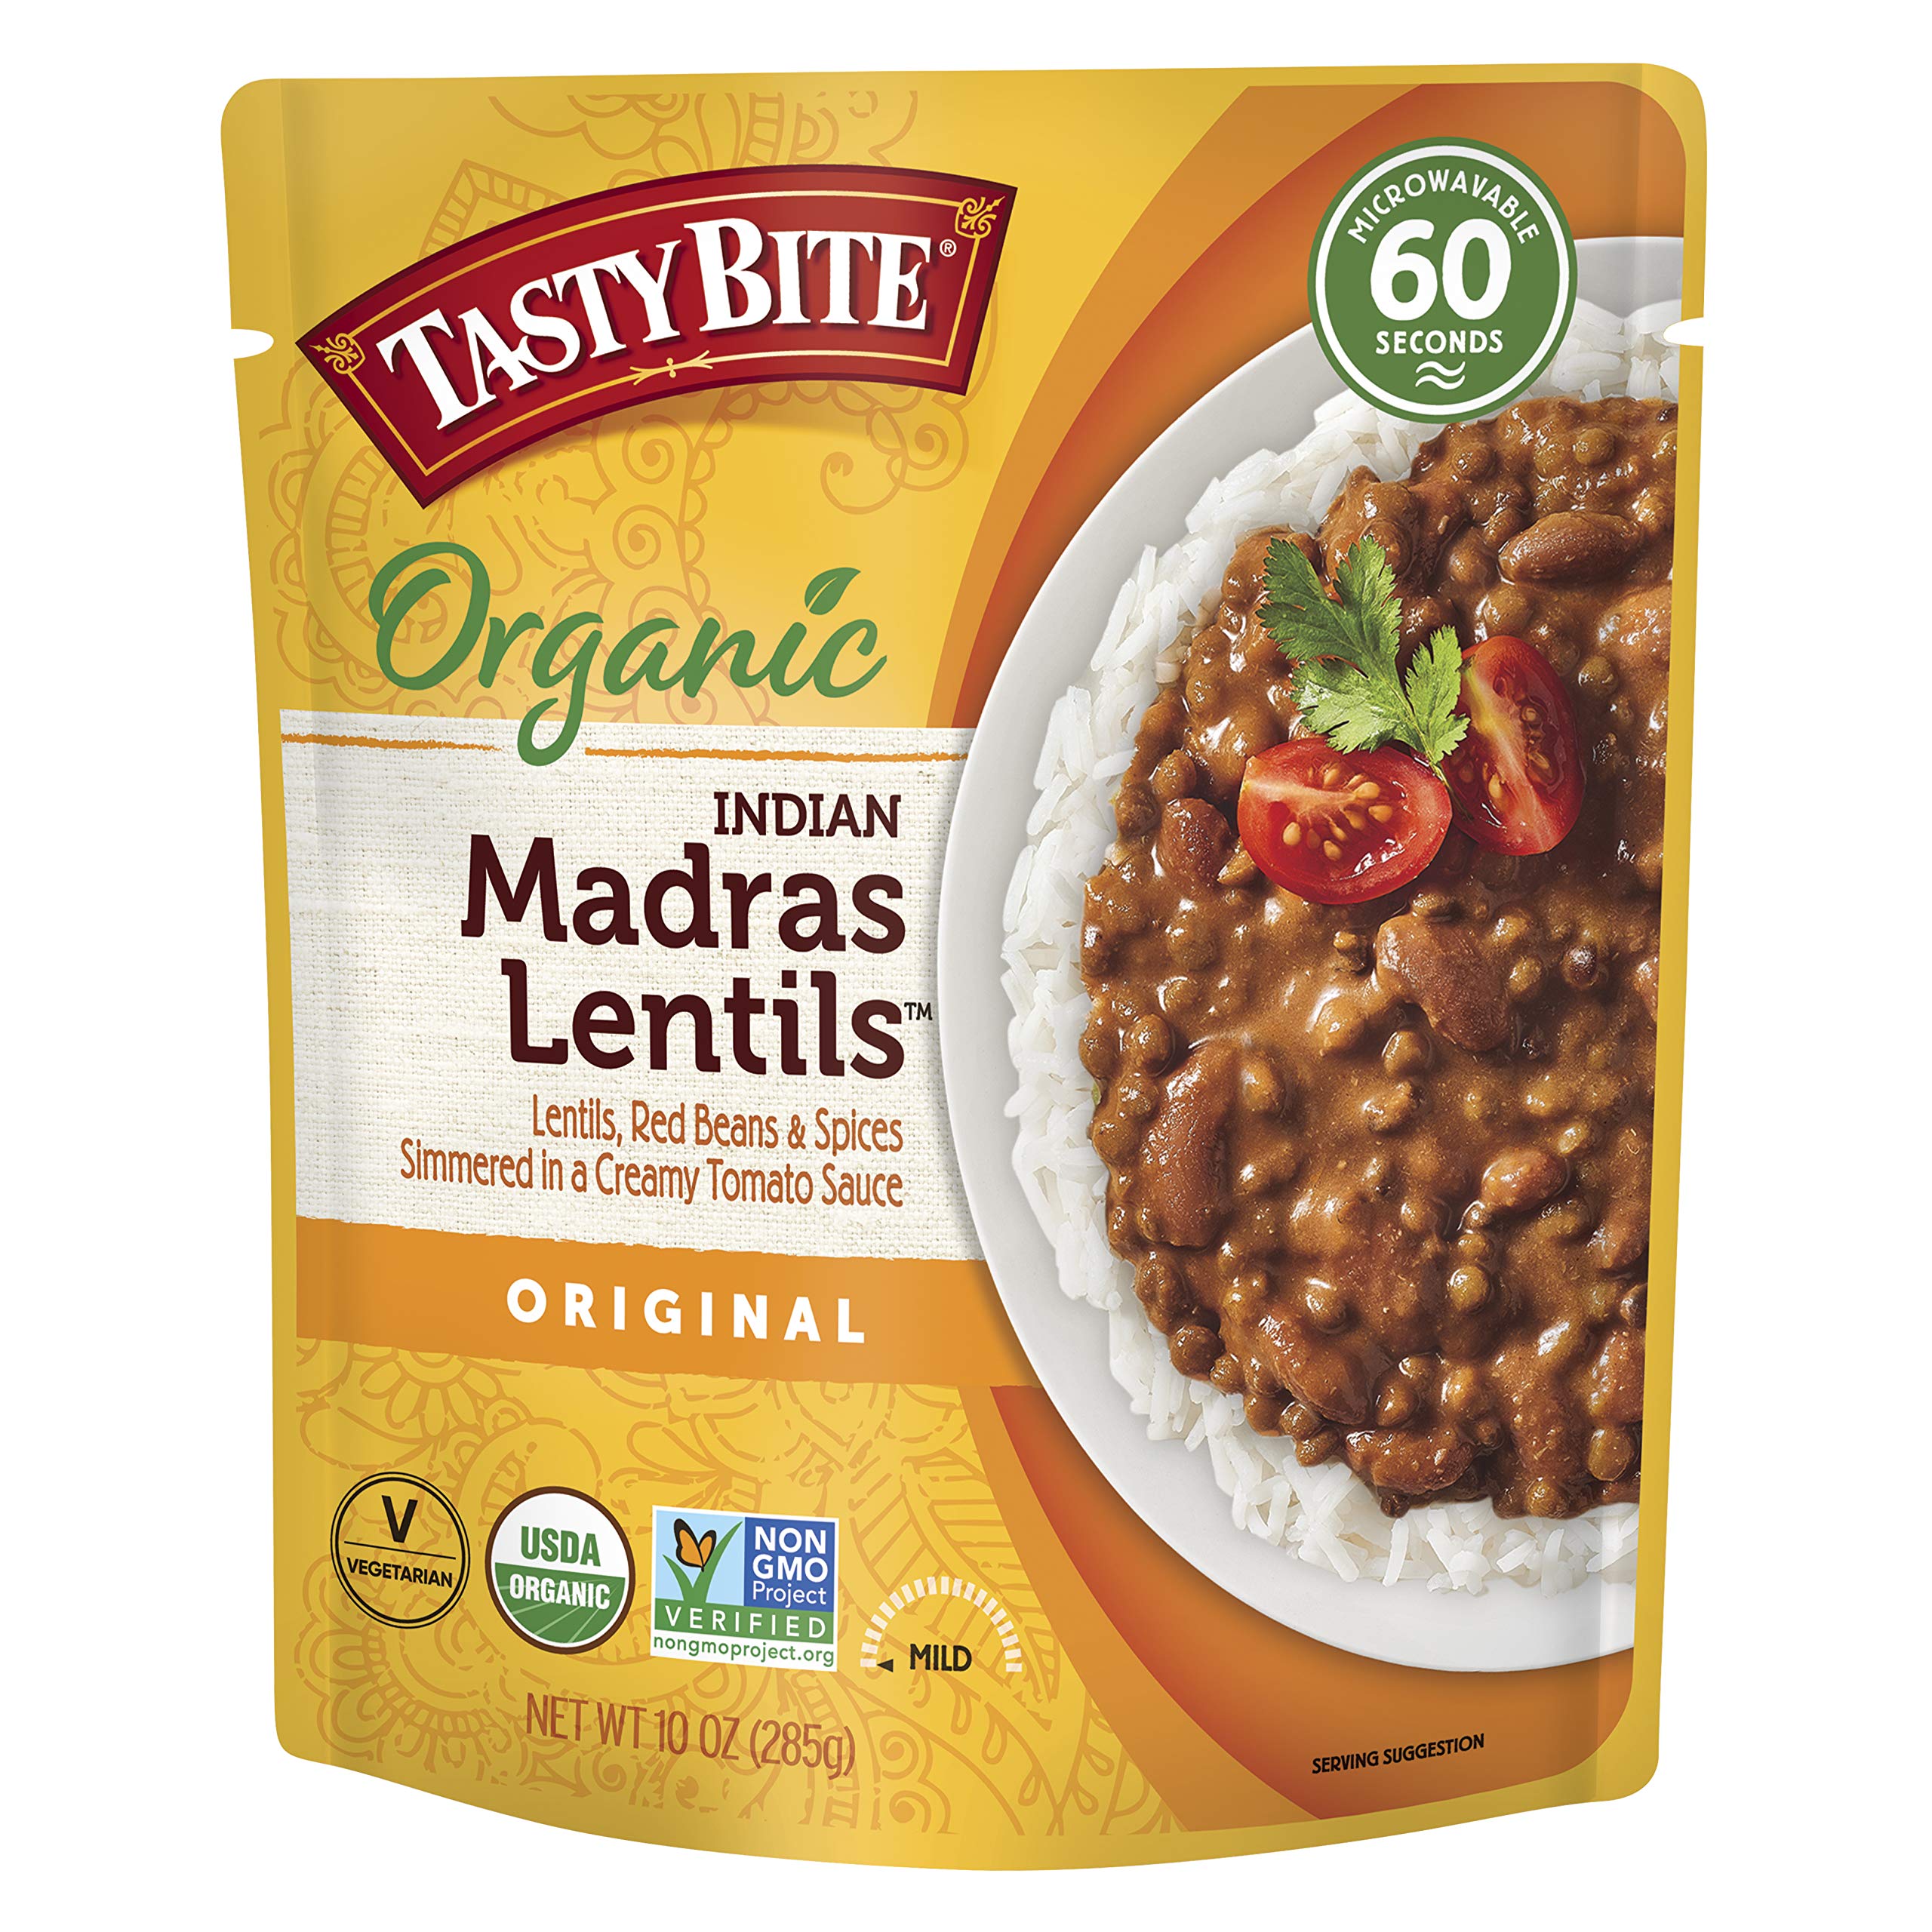 Tasty Bite Indian Madras Lentils, Microwaveable Ready to Eat Entrée, 10 Ounce (Pack of 6)~$9.01 @ Amazon~Free Prime Shipping!